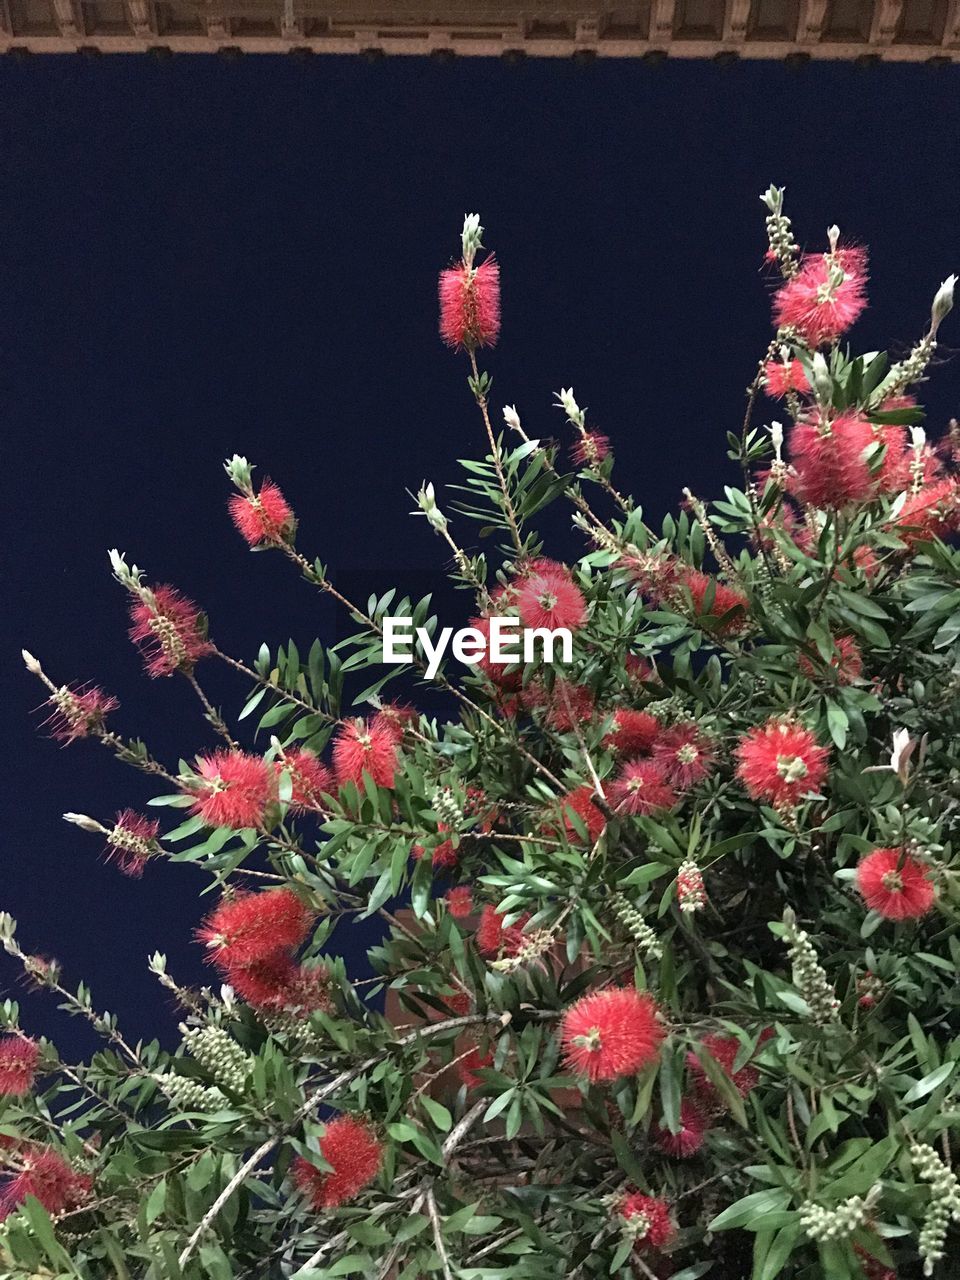 CLOSE-UP OF RED FLOWERS BLOOMING AGAINST TREES